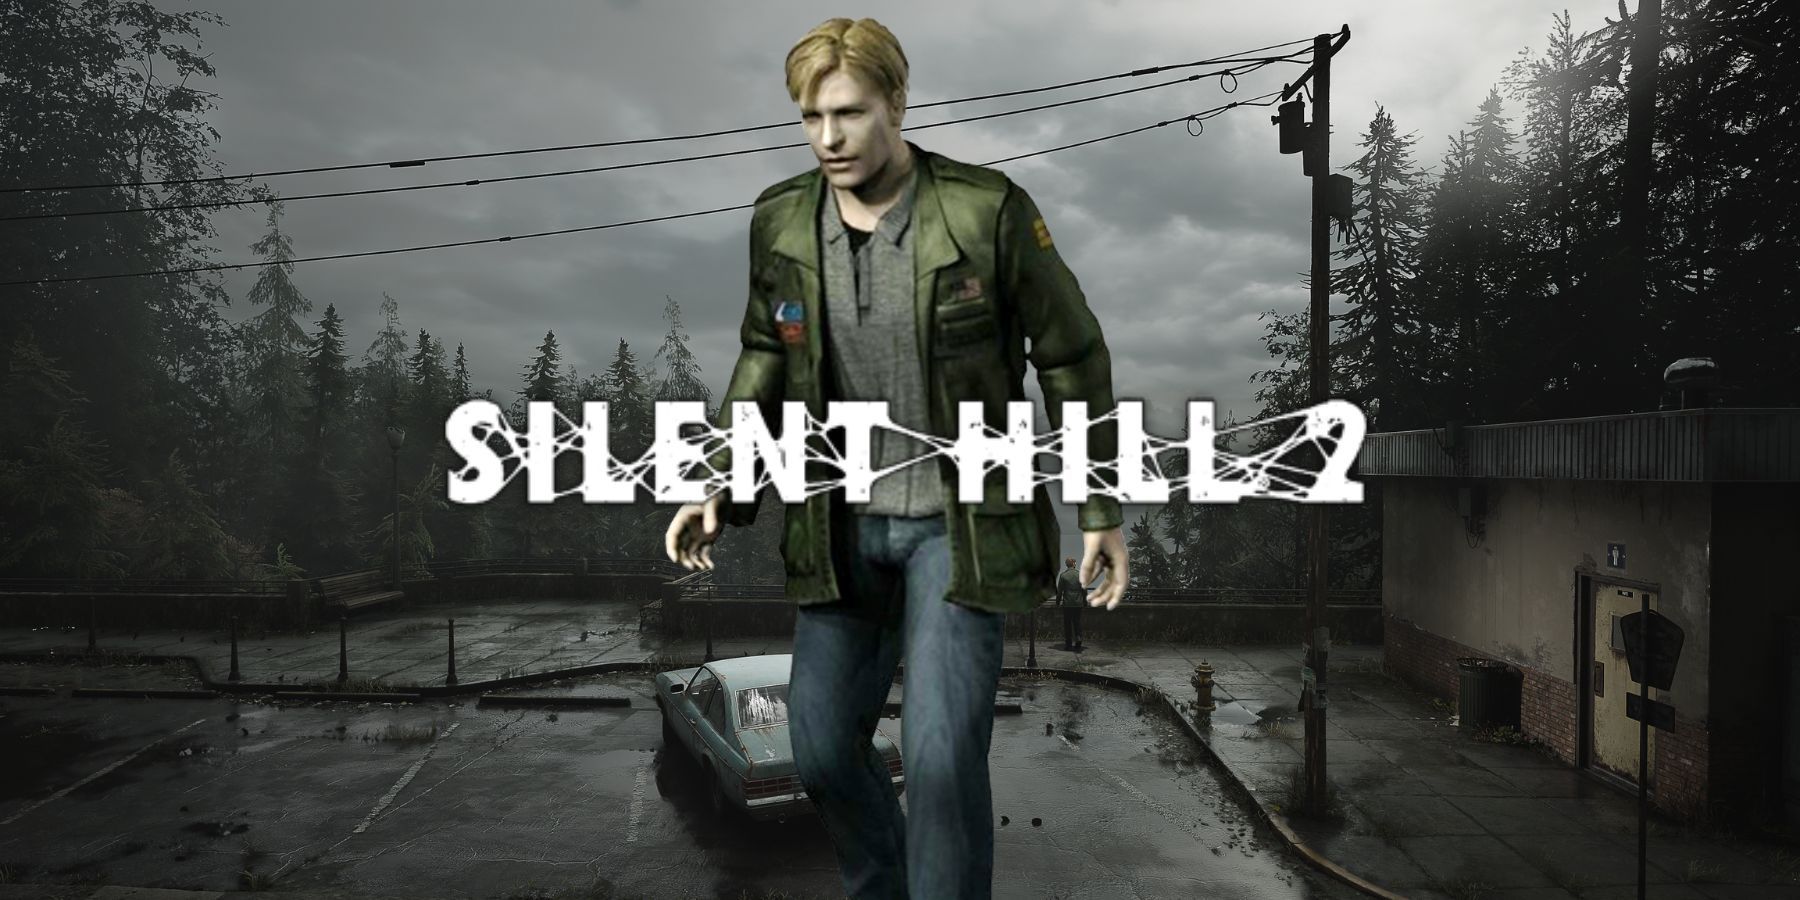 Silent Hill 2 remake trailer revealed, upgraded graphics and combat